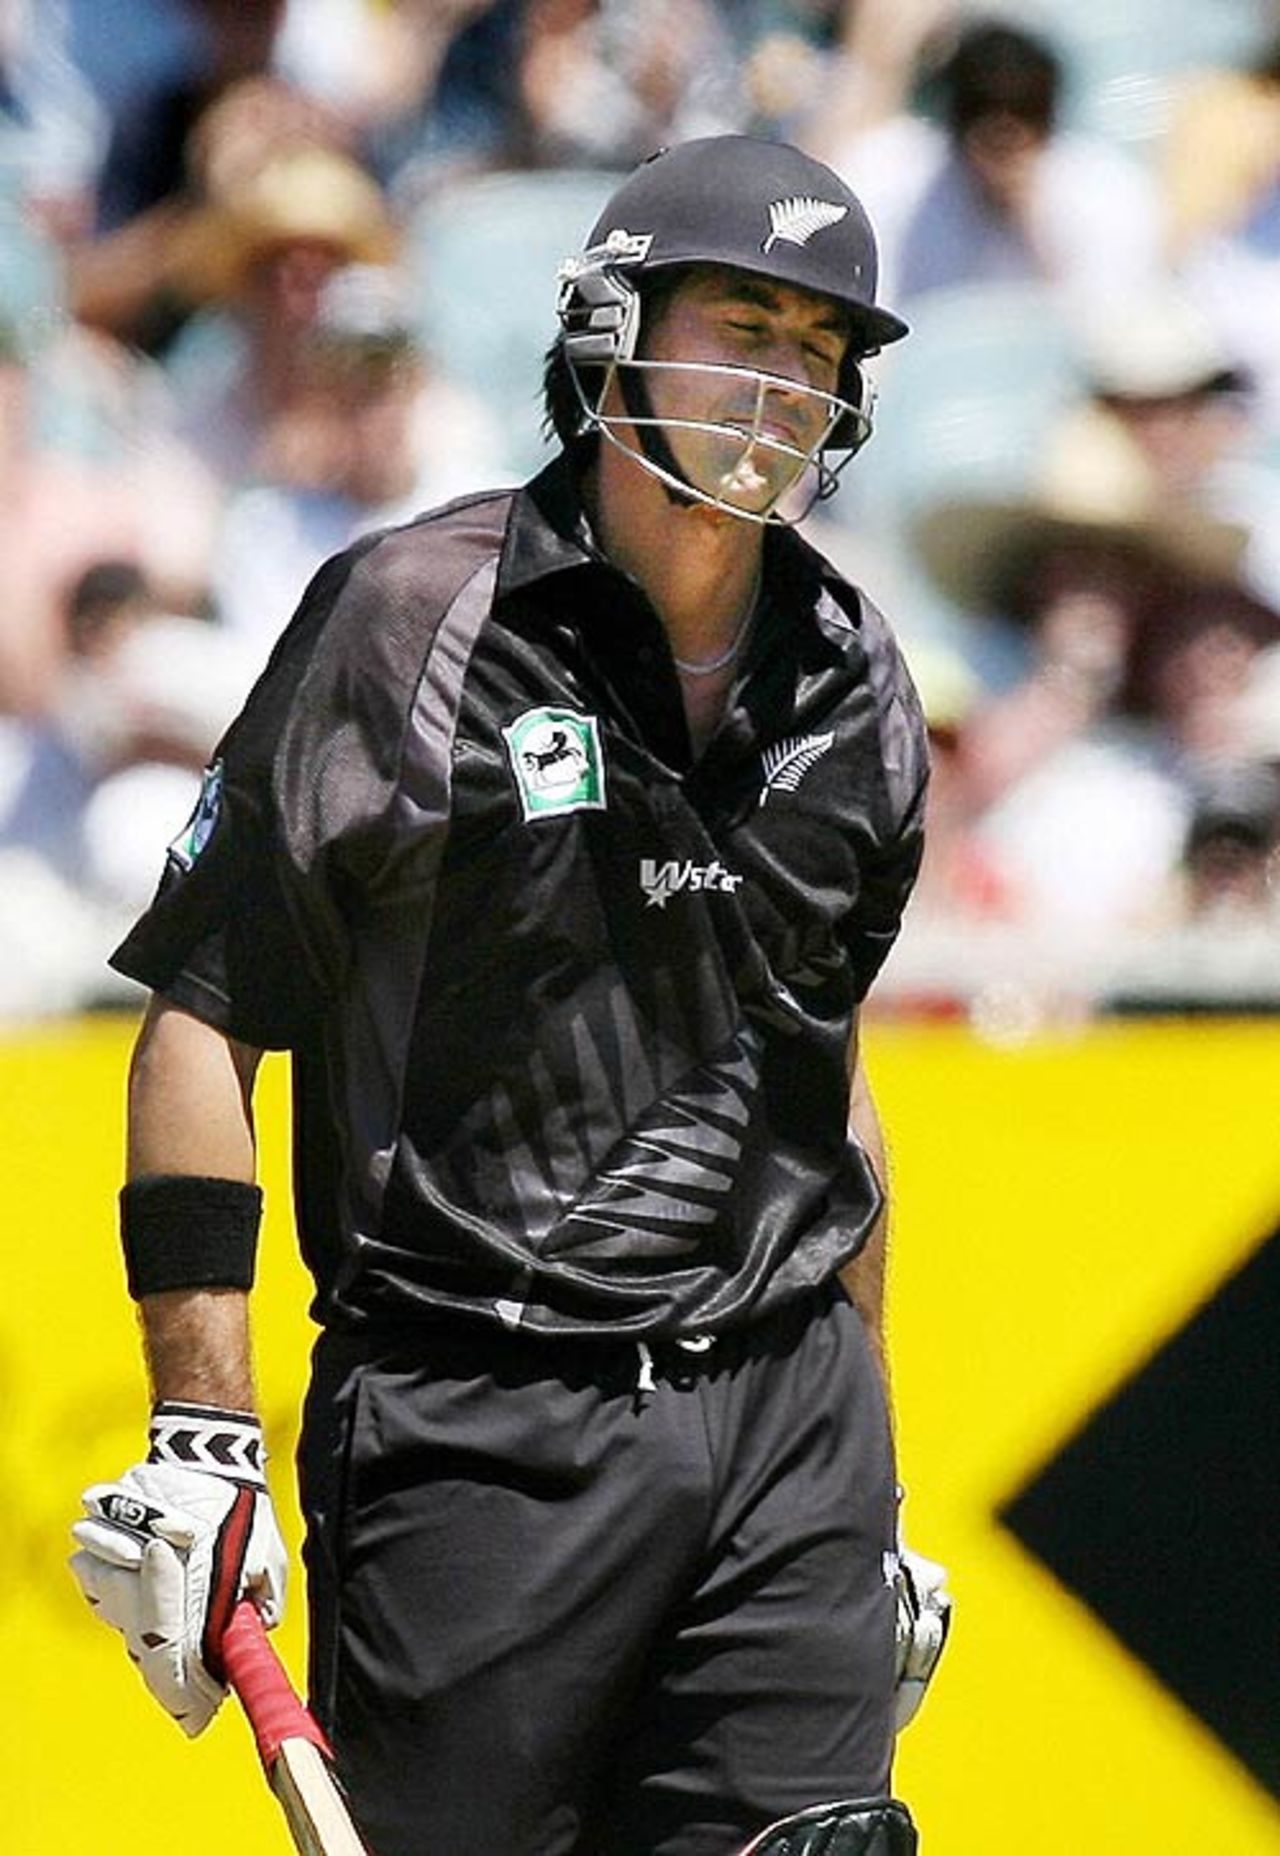 Stephen Fleming shows his frustration after another failure, Australia v New Zealand, CB Series, 11th match, Melbourne, February 4, 2007